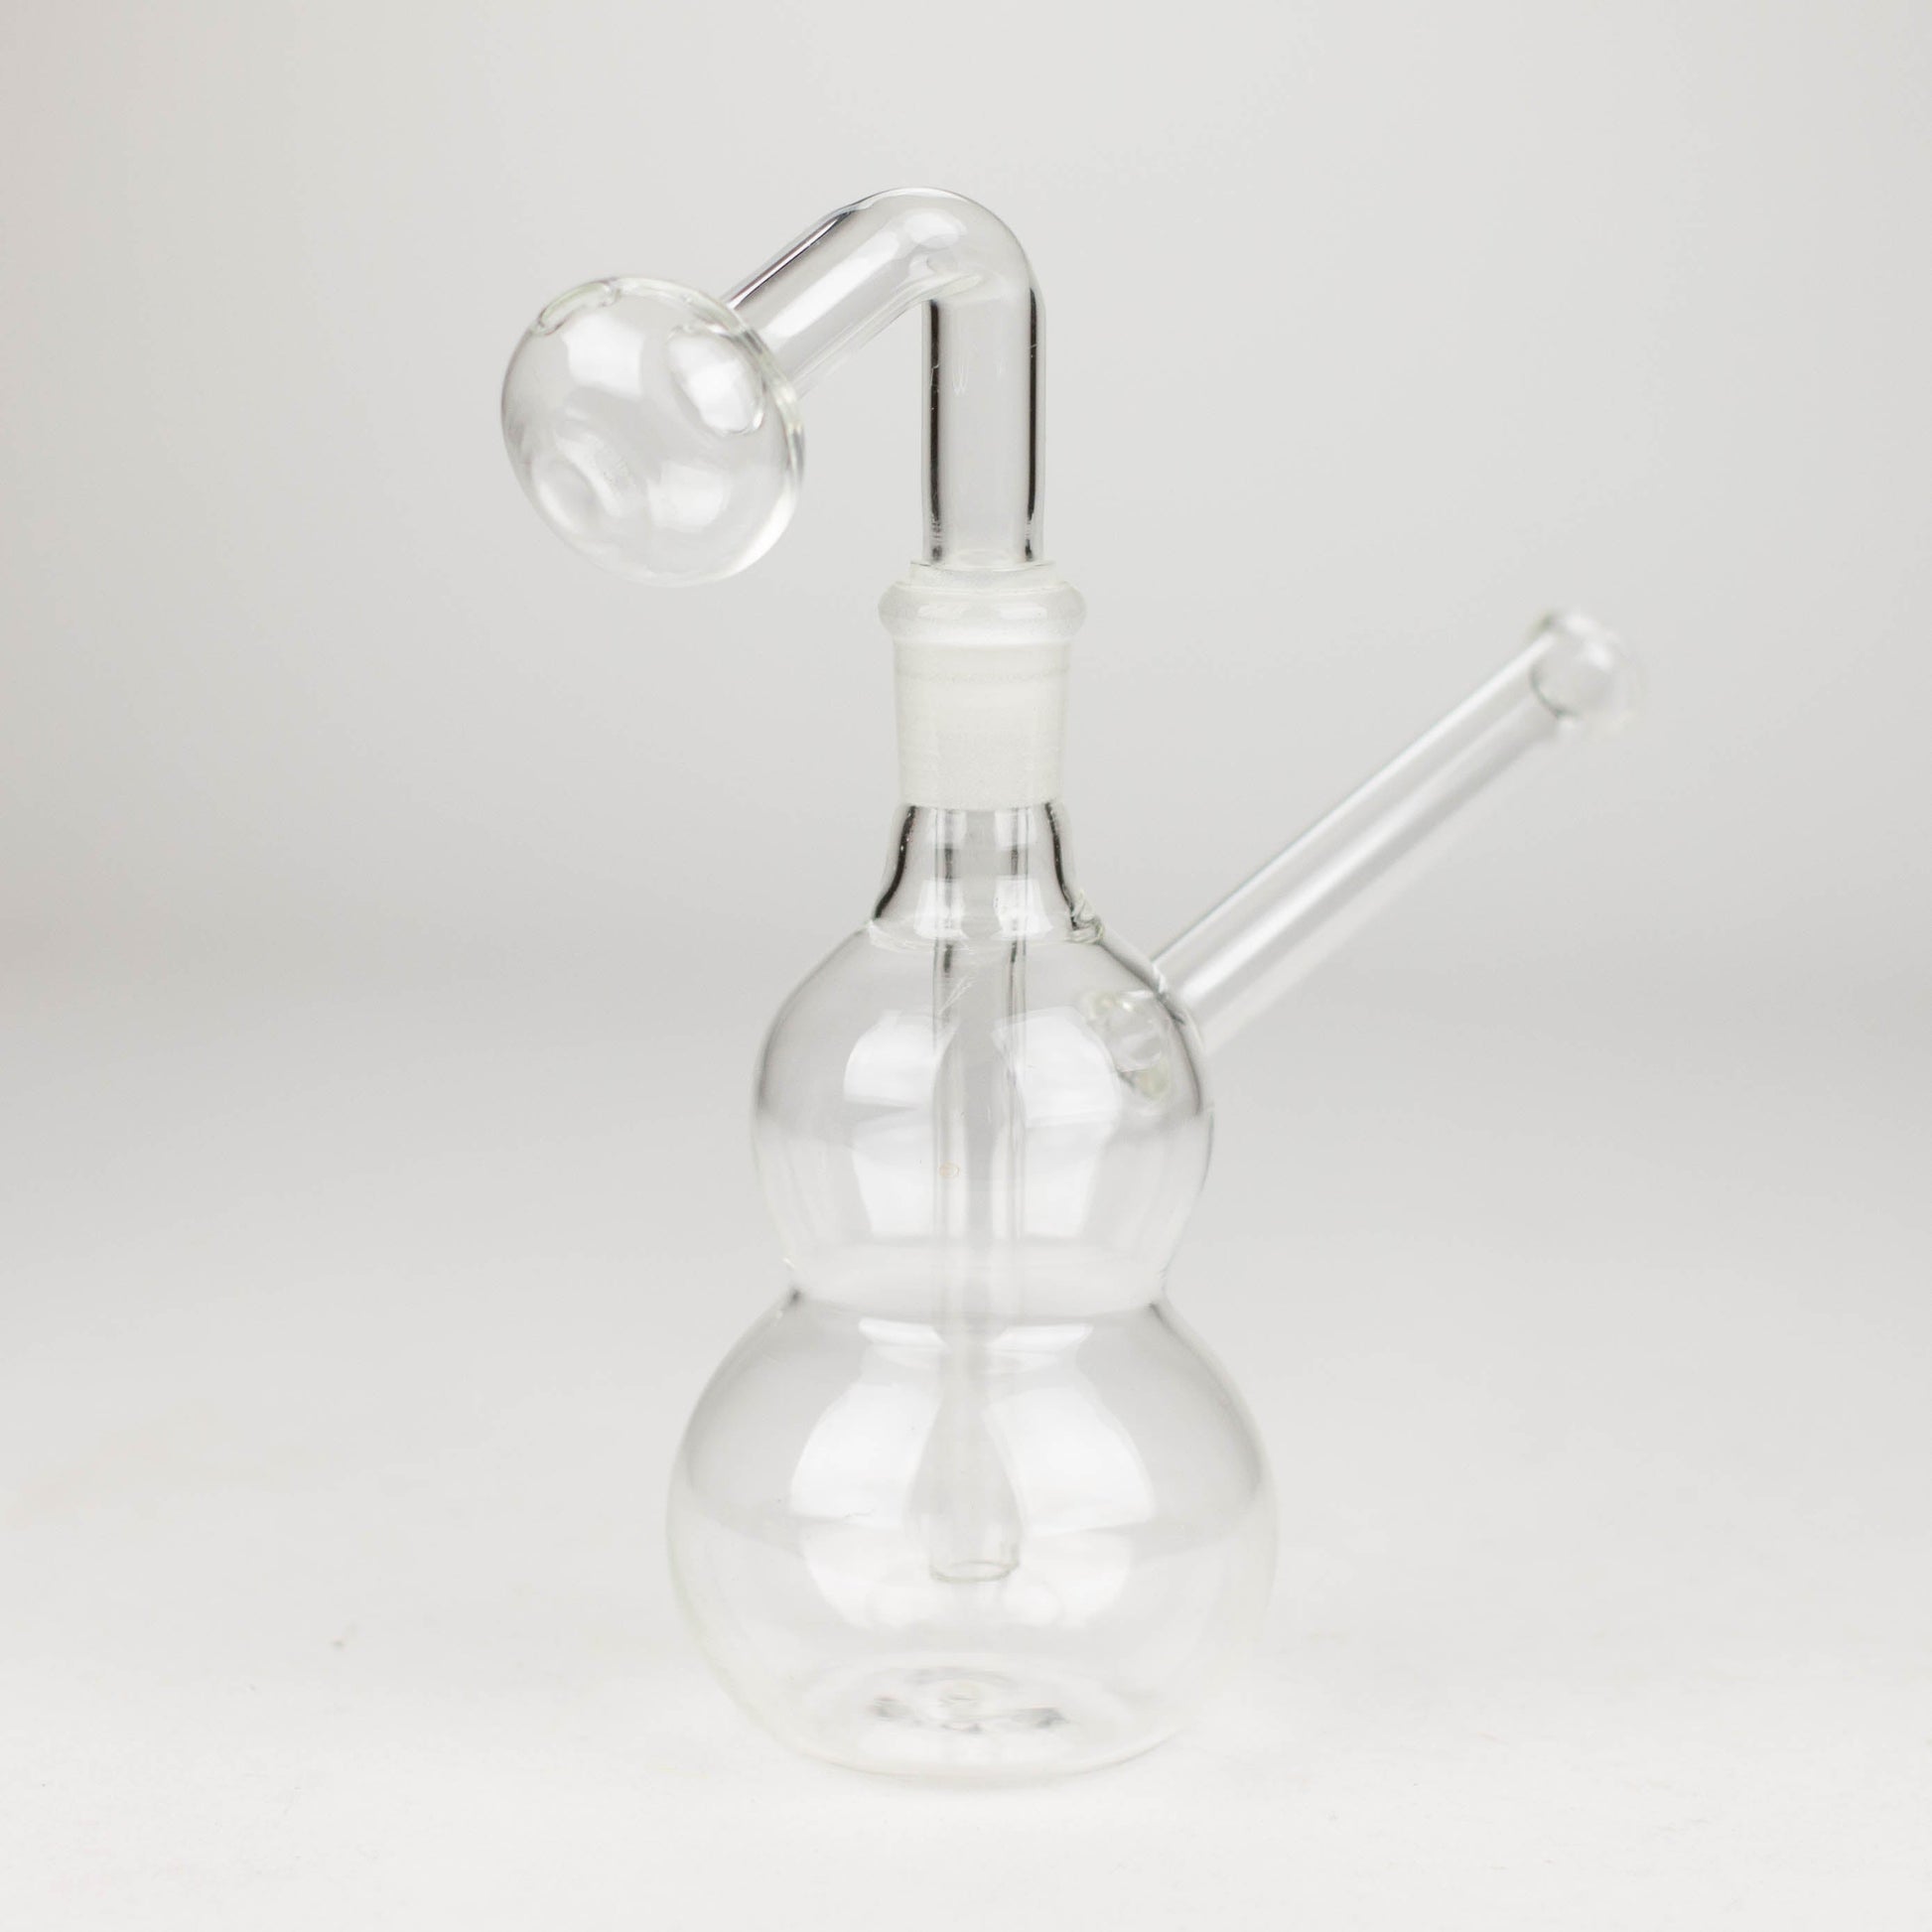 6" glass oil rig_2